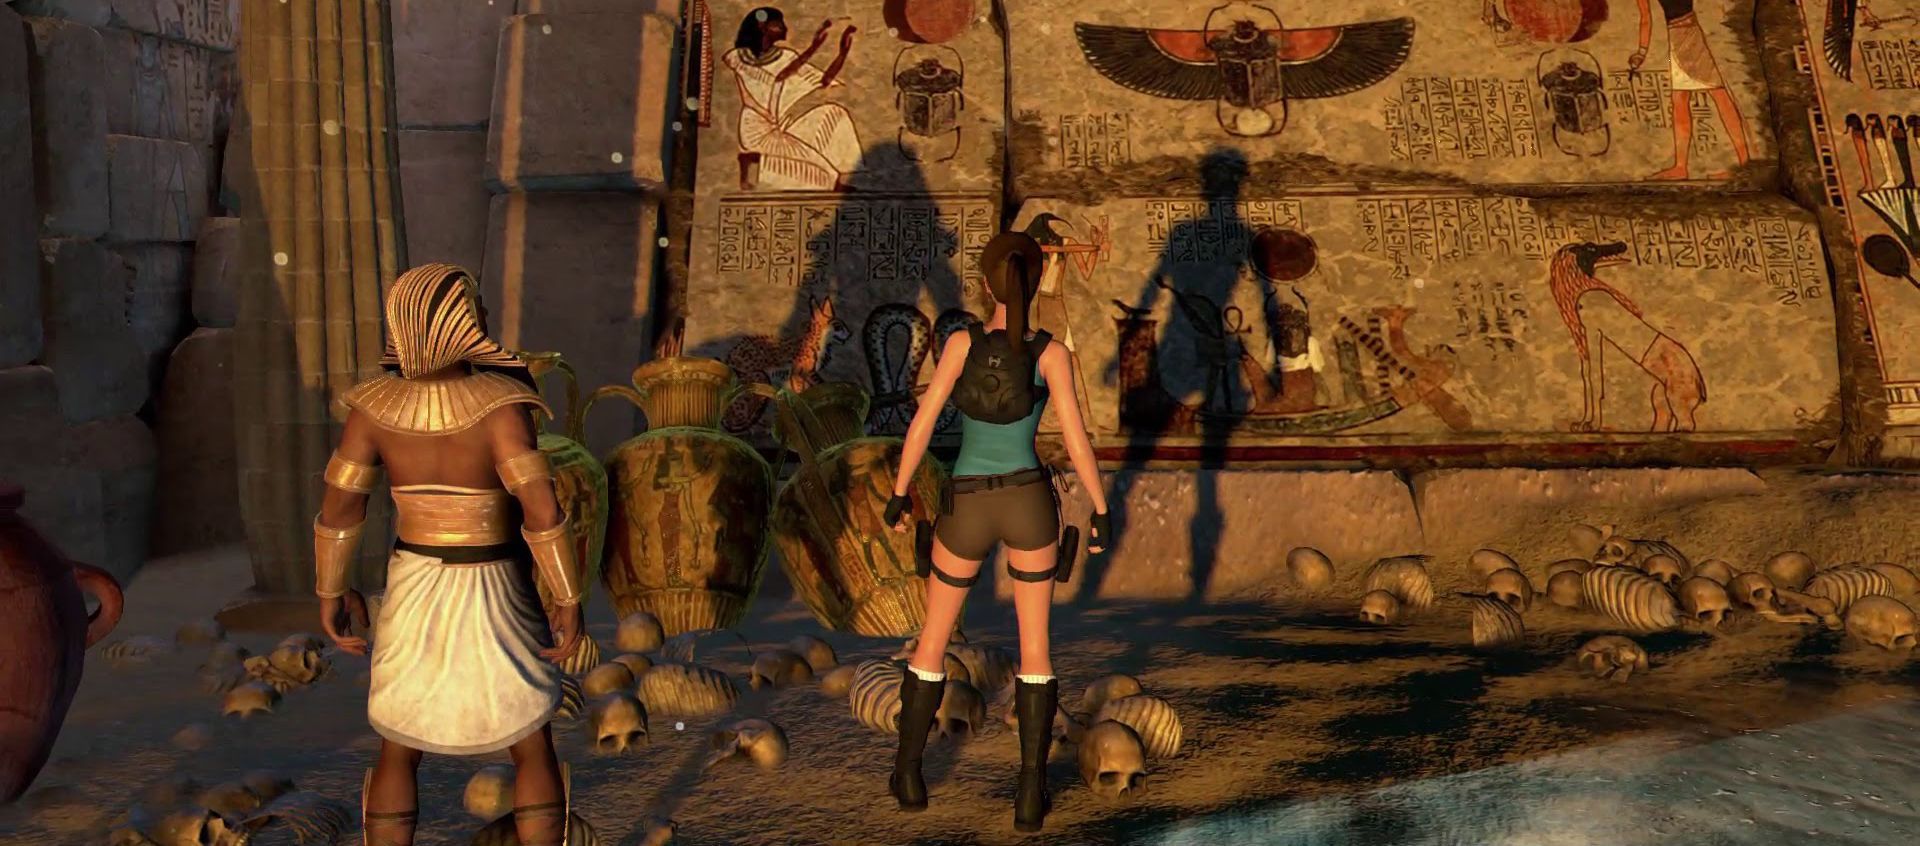 Review: Lara Croft and the Temple of Osiris